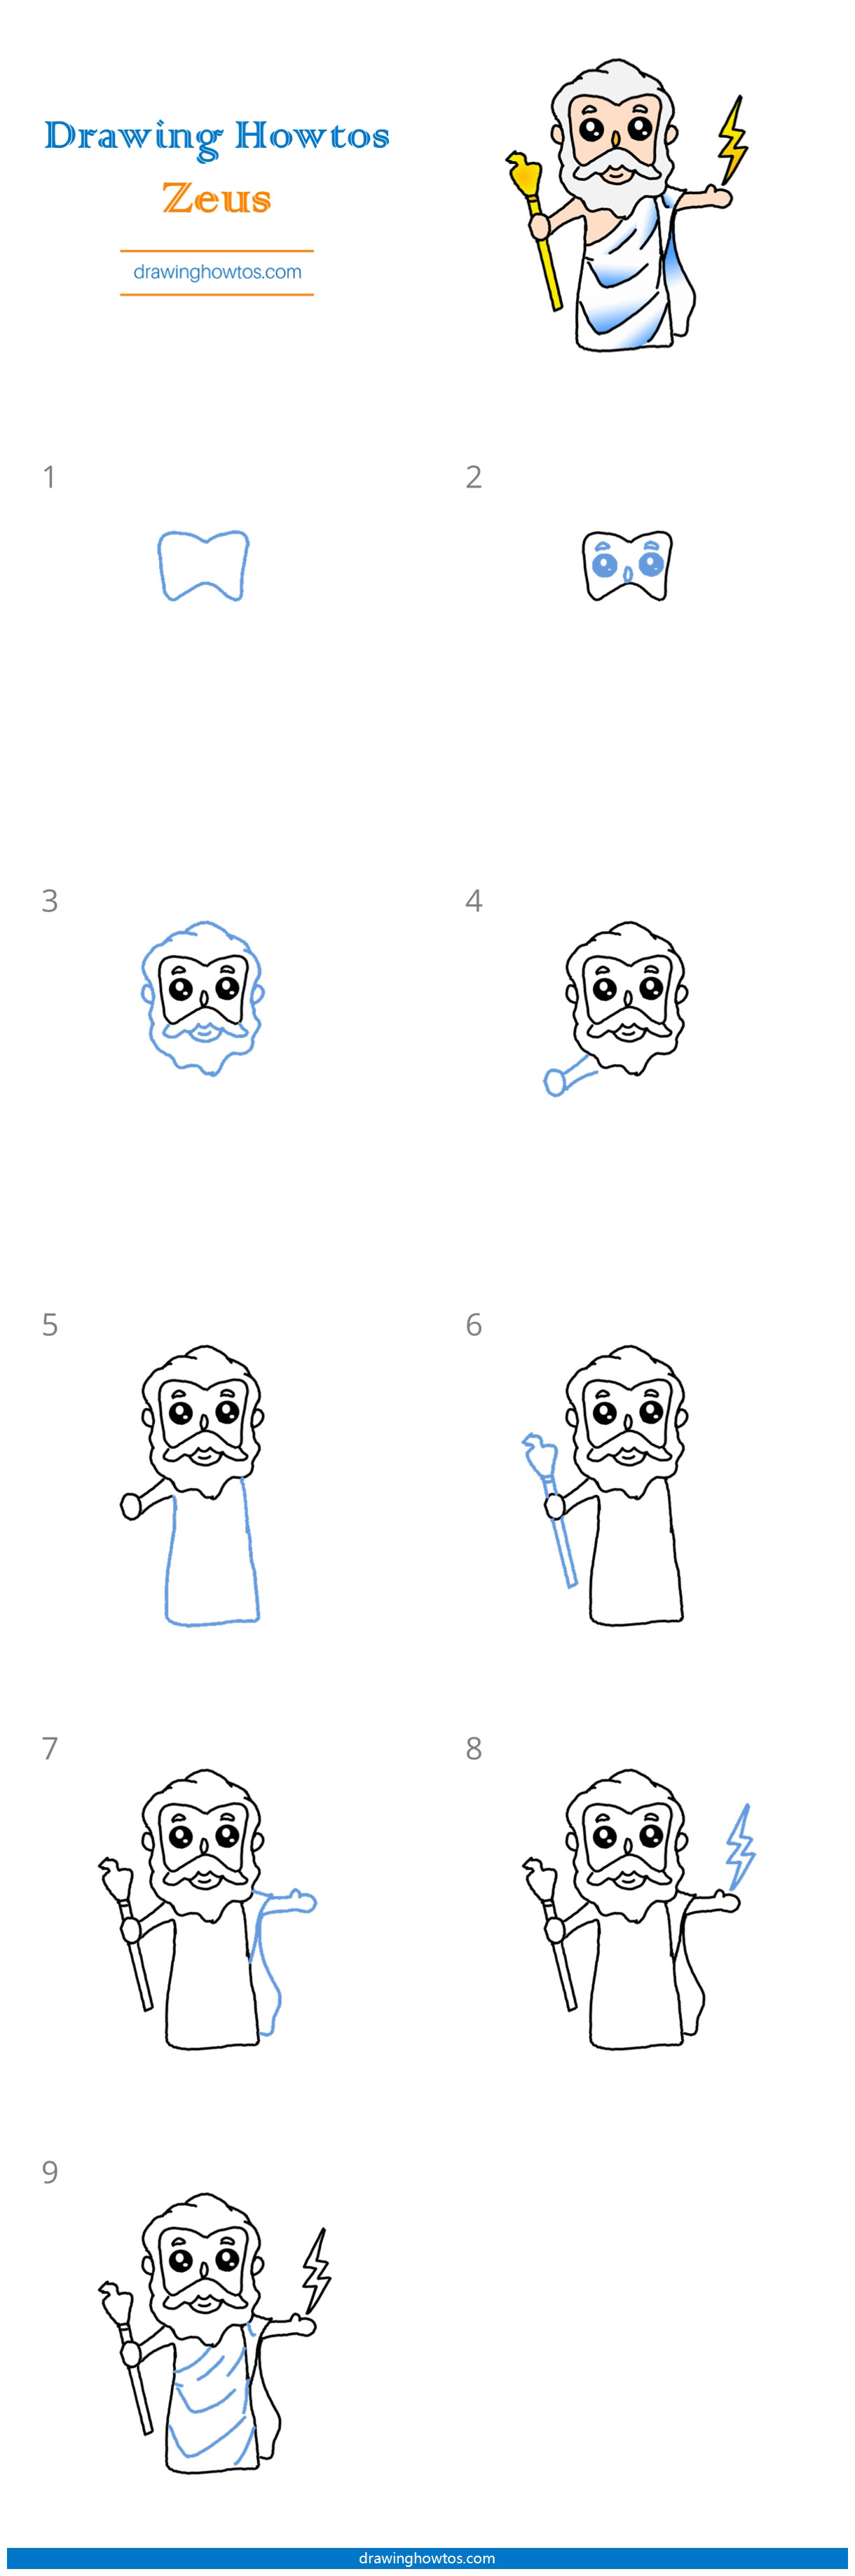 How to Draw Zeus Step by Step